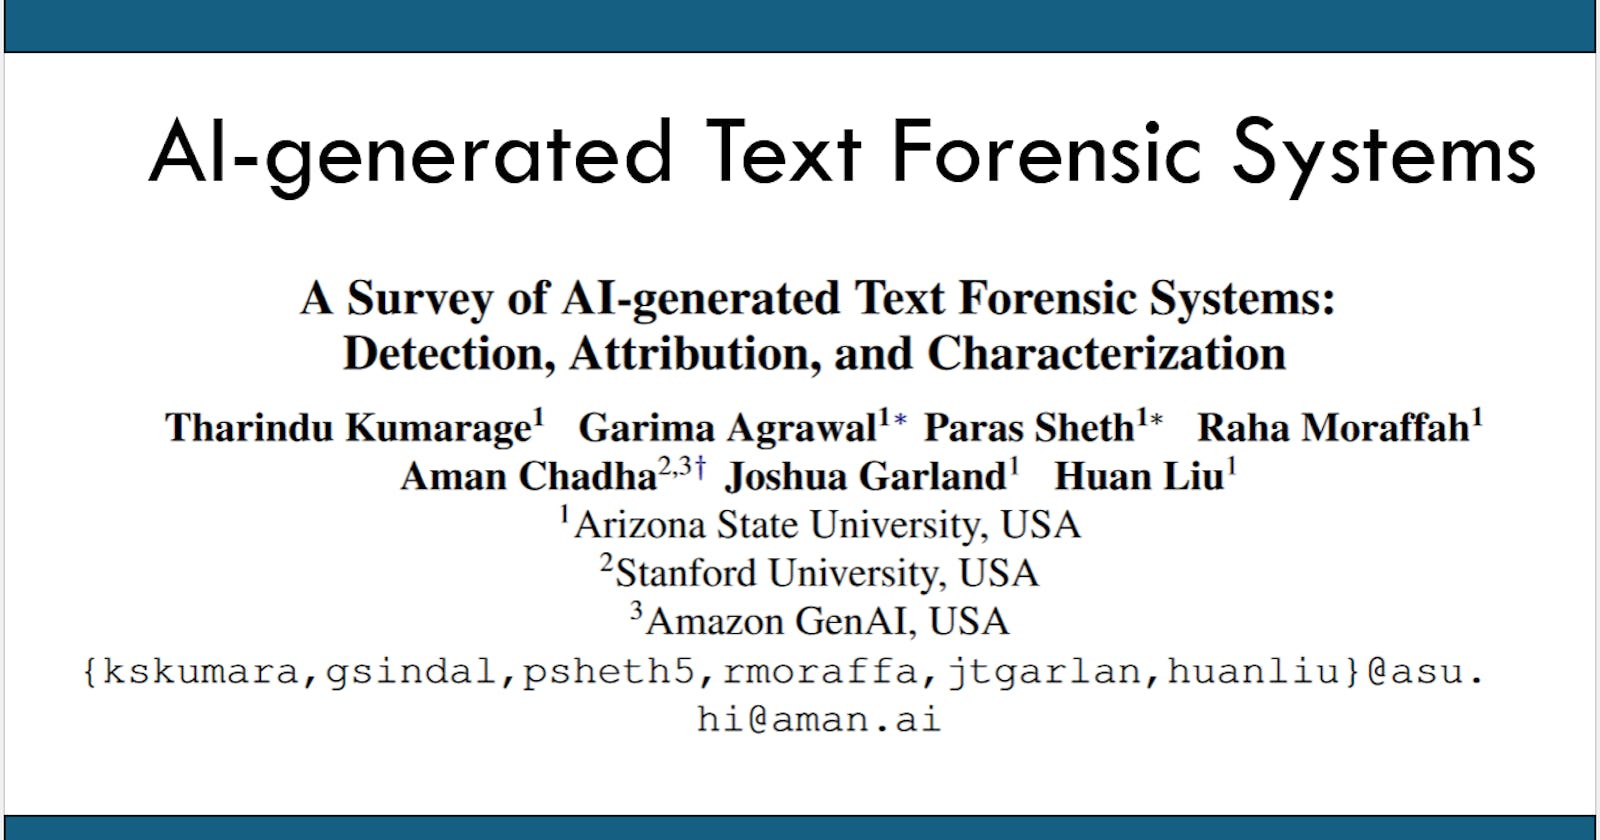 A Survey of AI-generated Text Forensic Systems